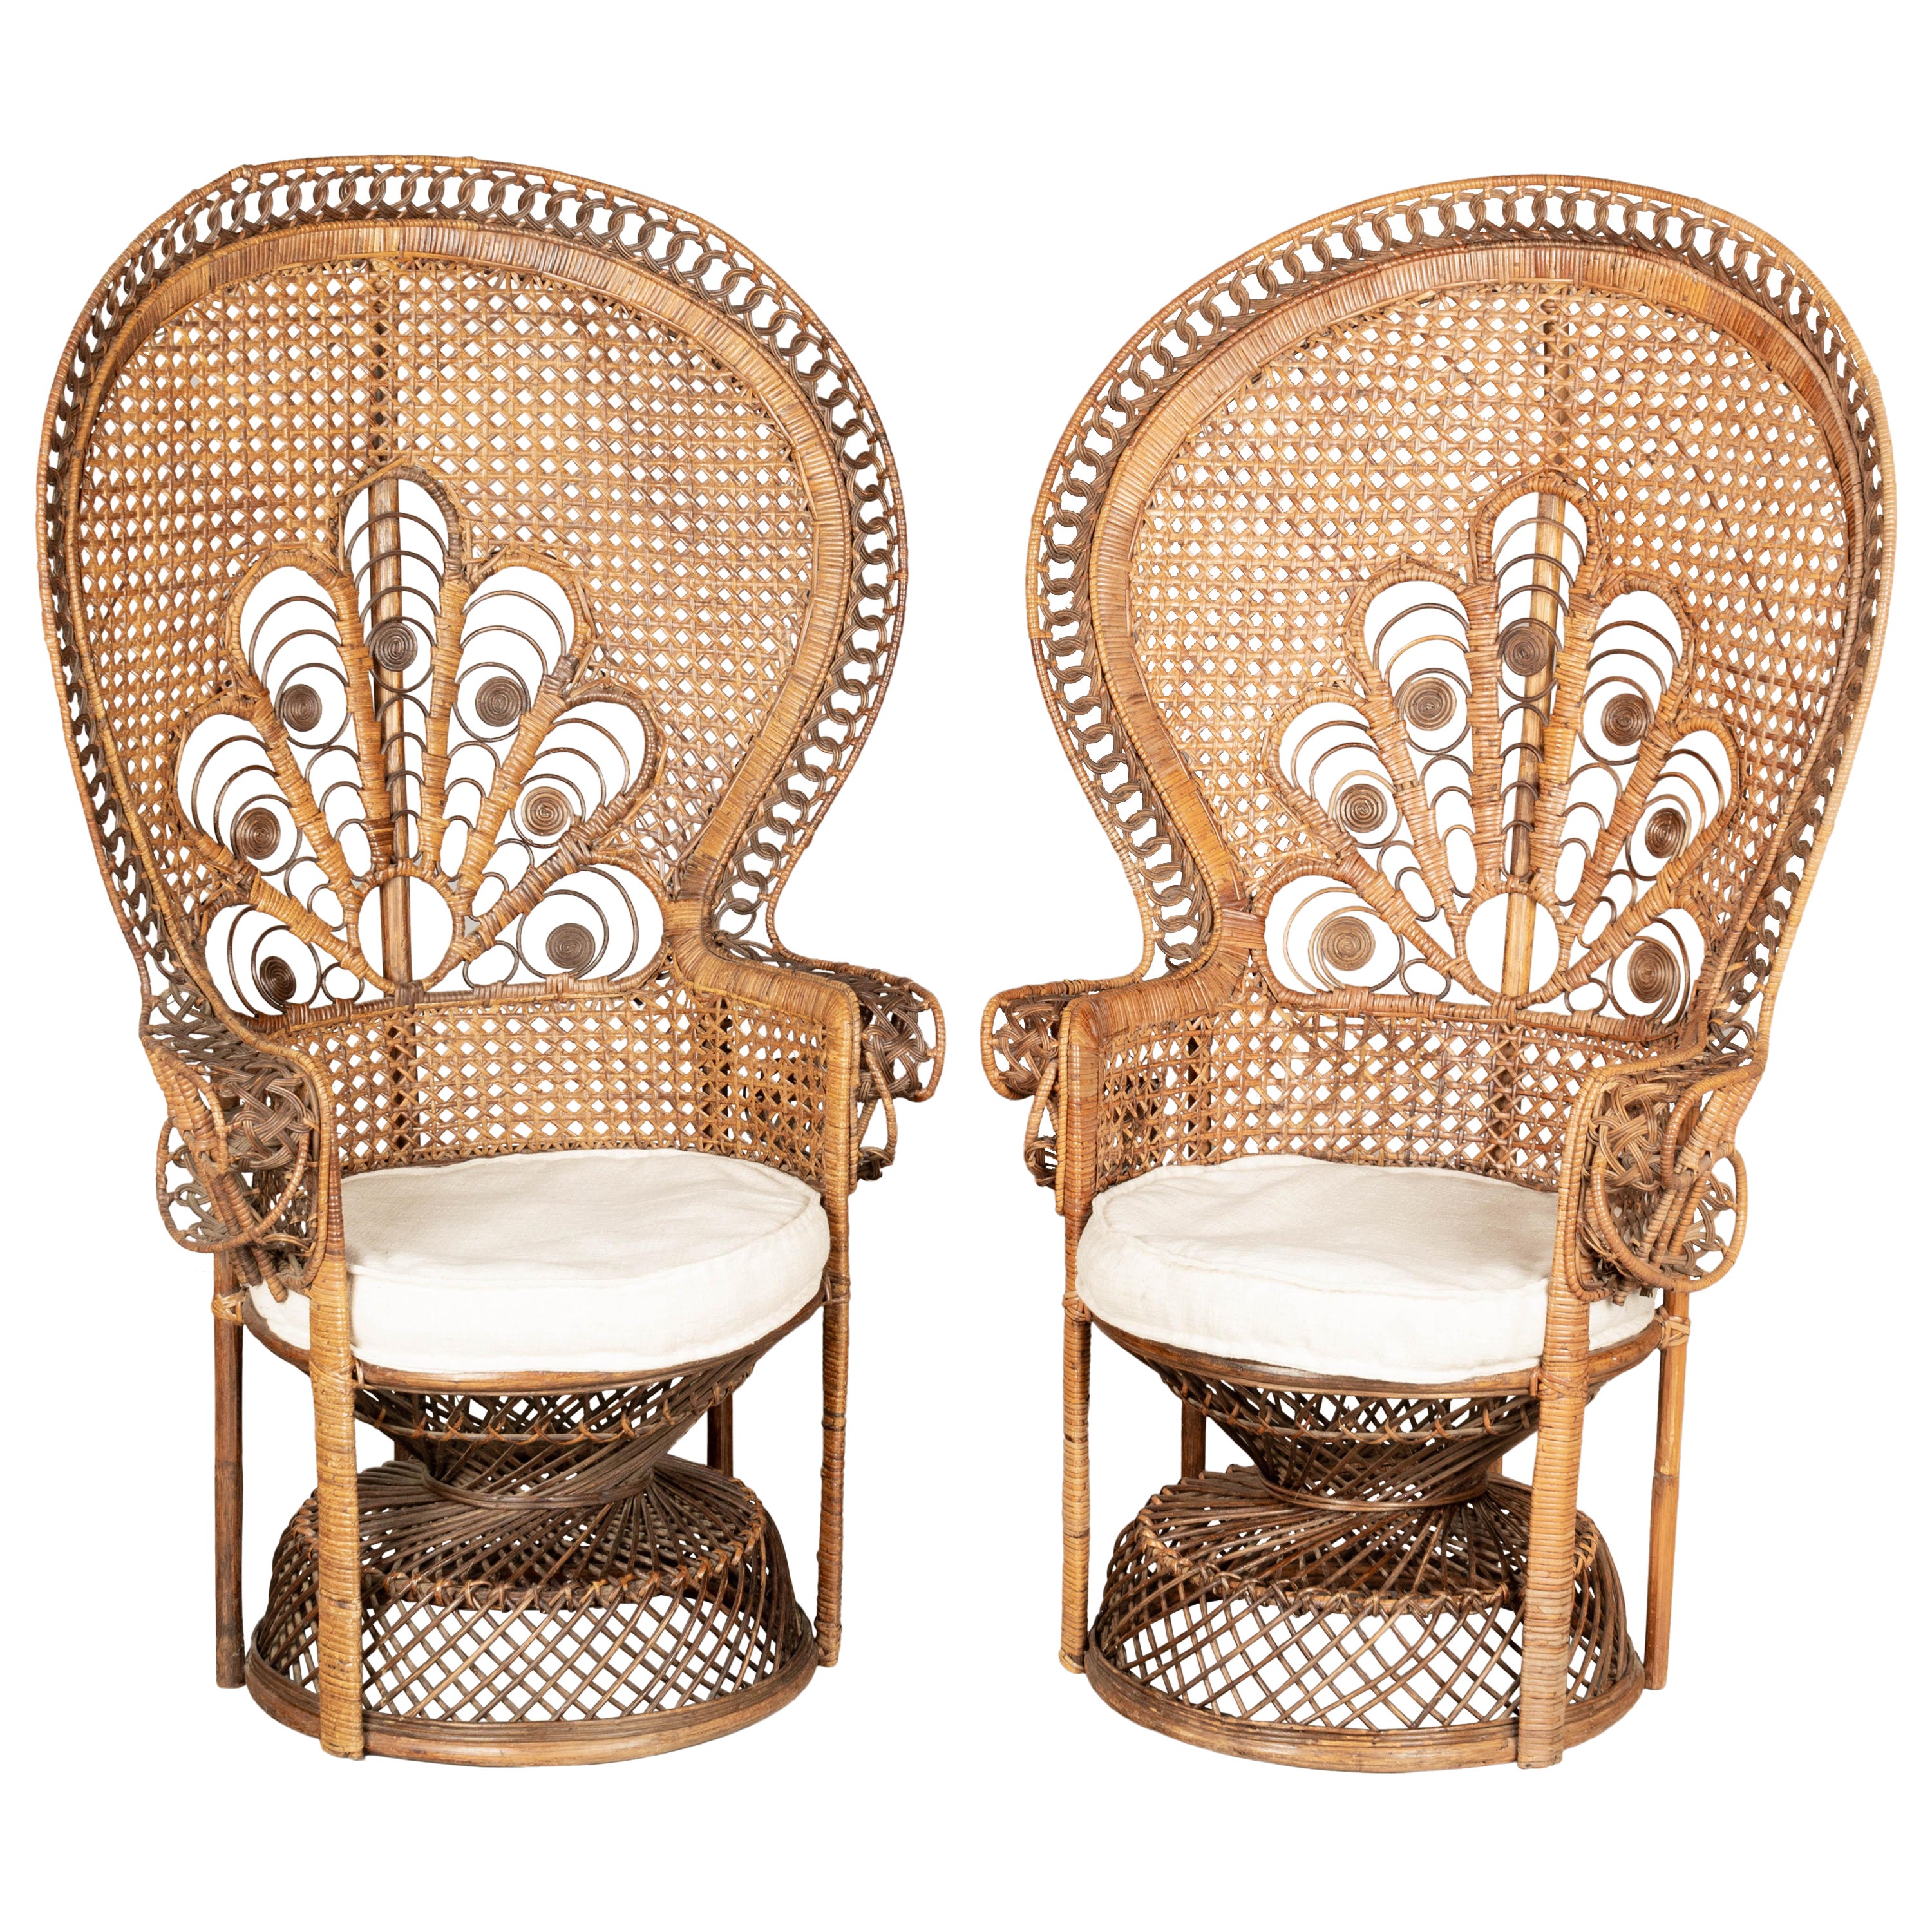 Vintage French Emmanuelle Rattan Peacock Fan Chairs, a Pair